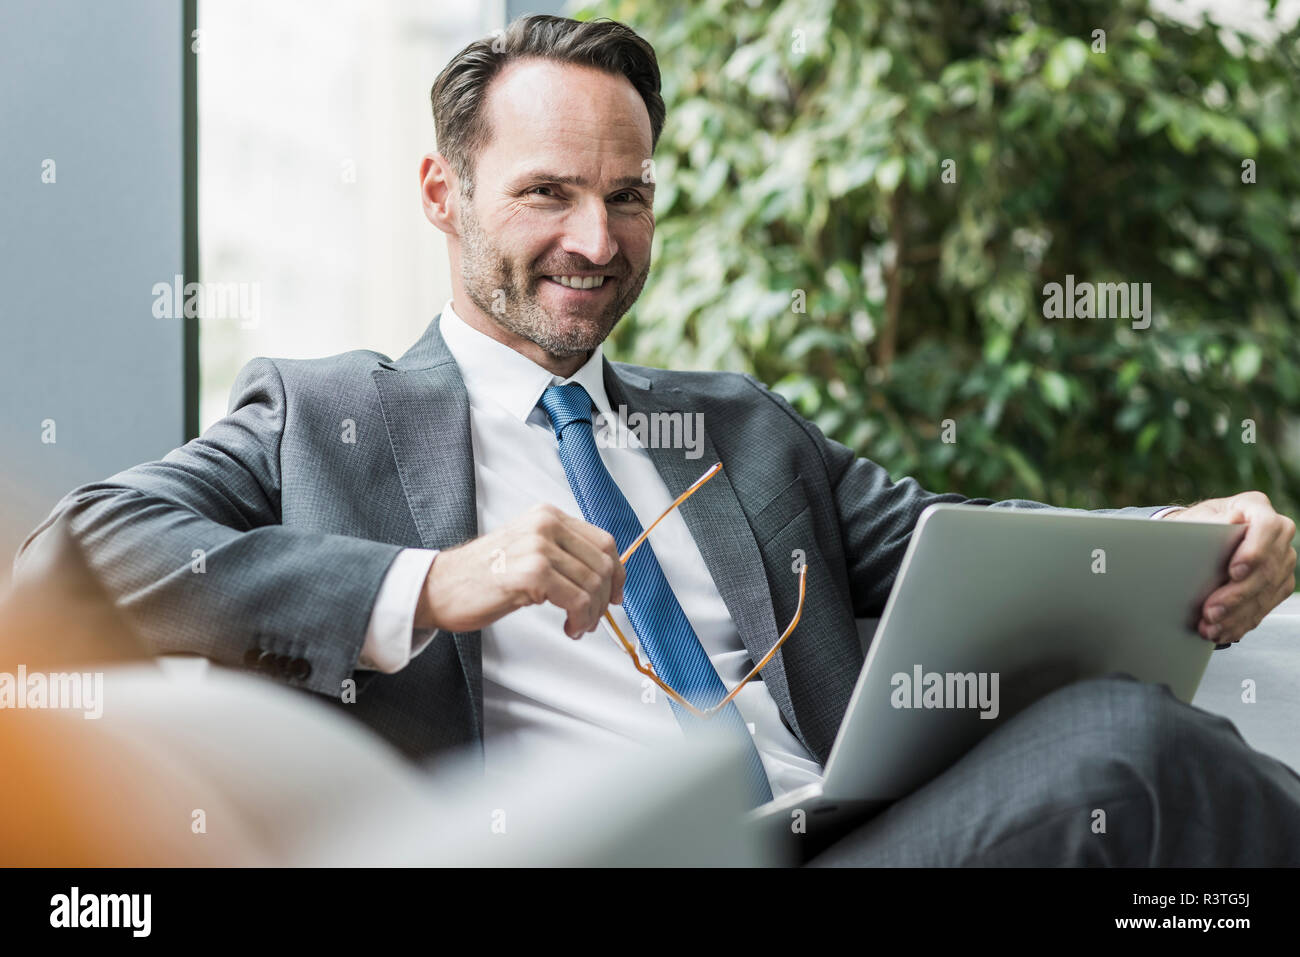 Portrait of smiling businessman sitting in lobby with laptop Stock Photo